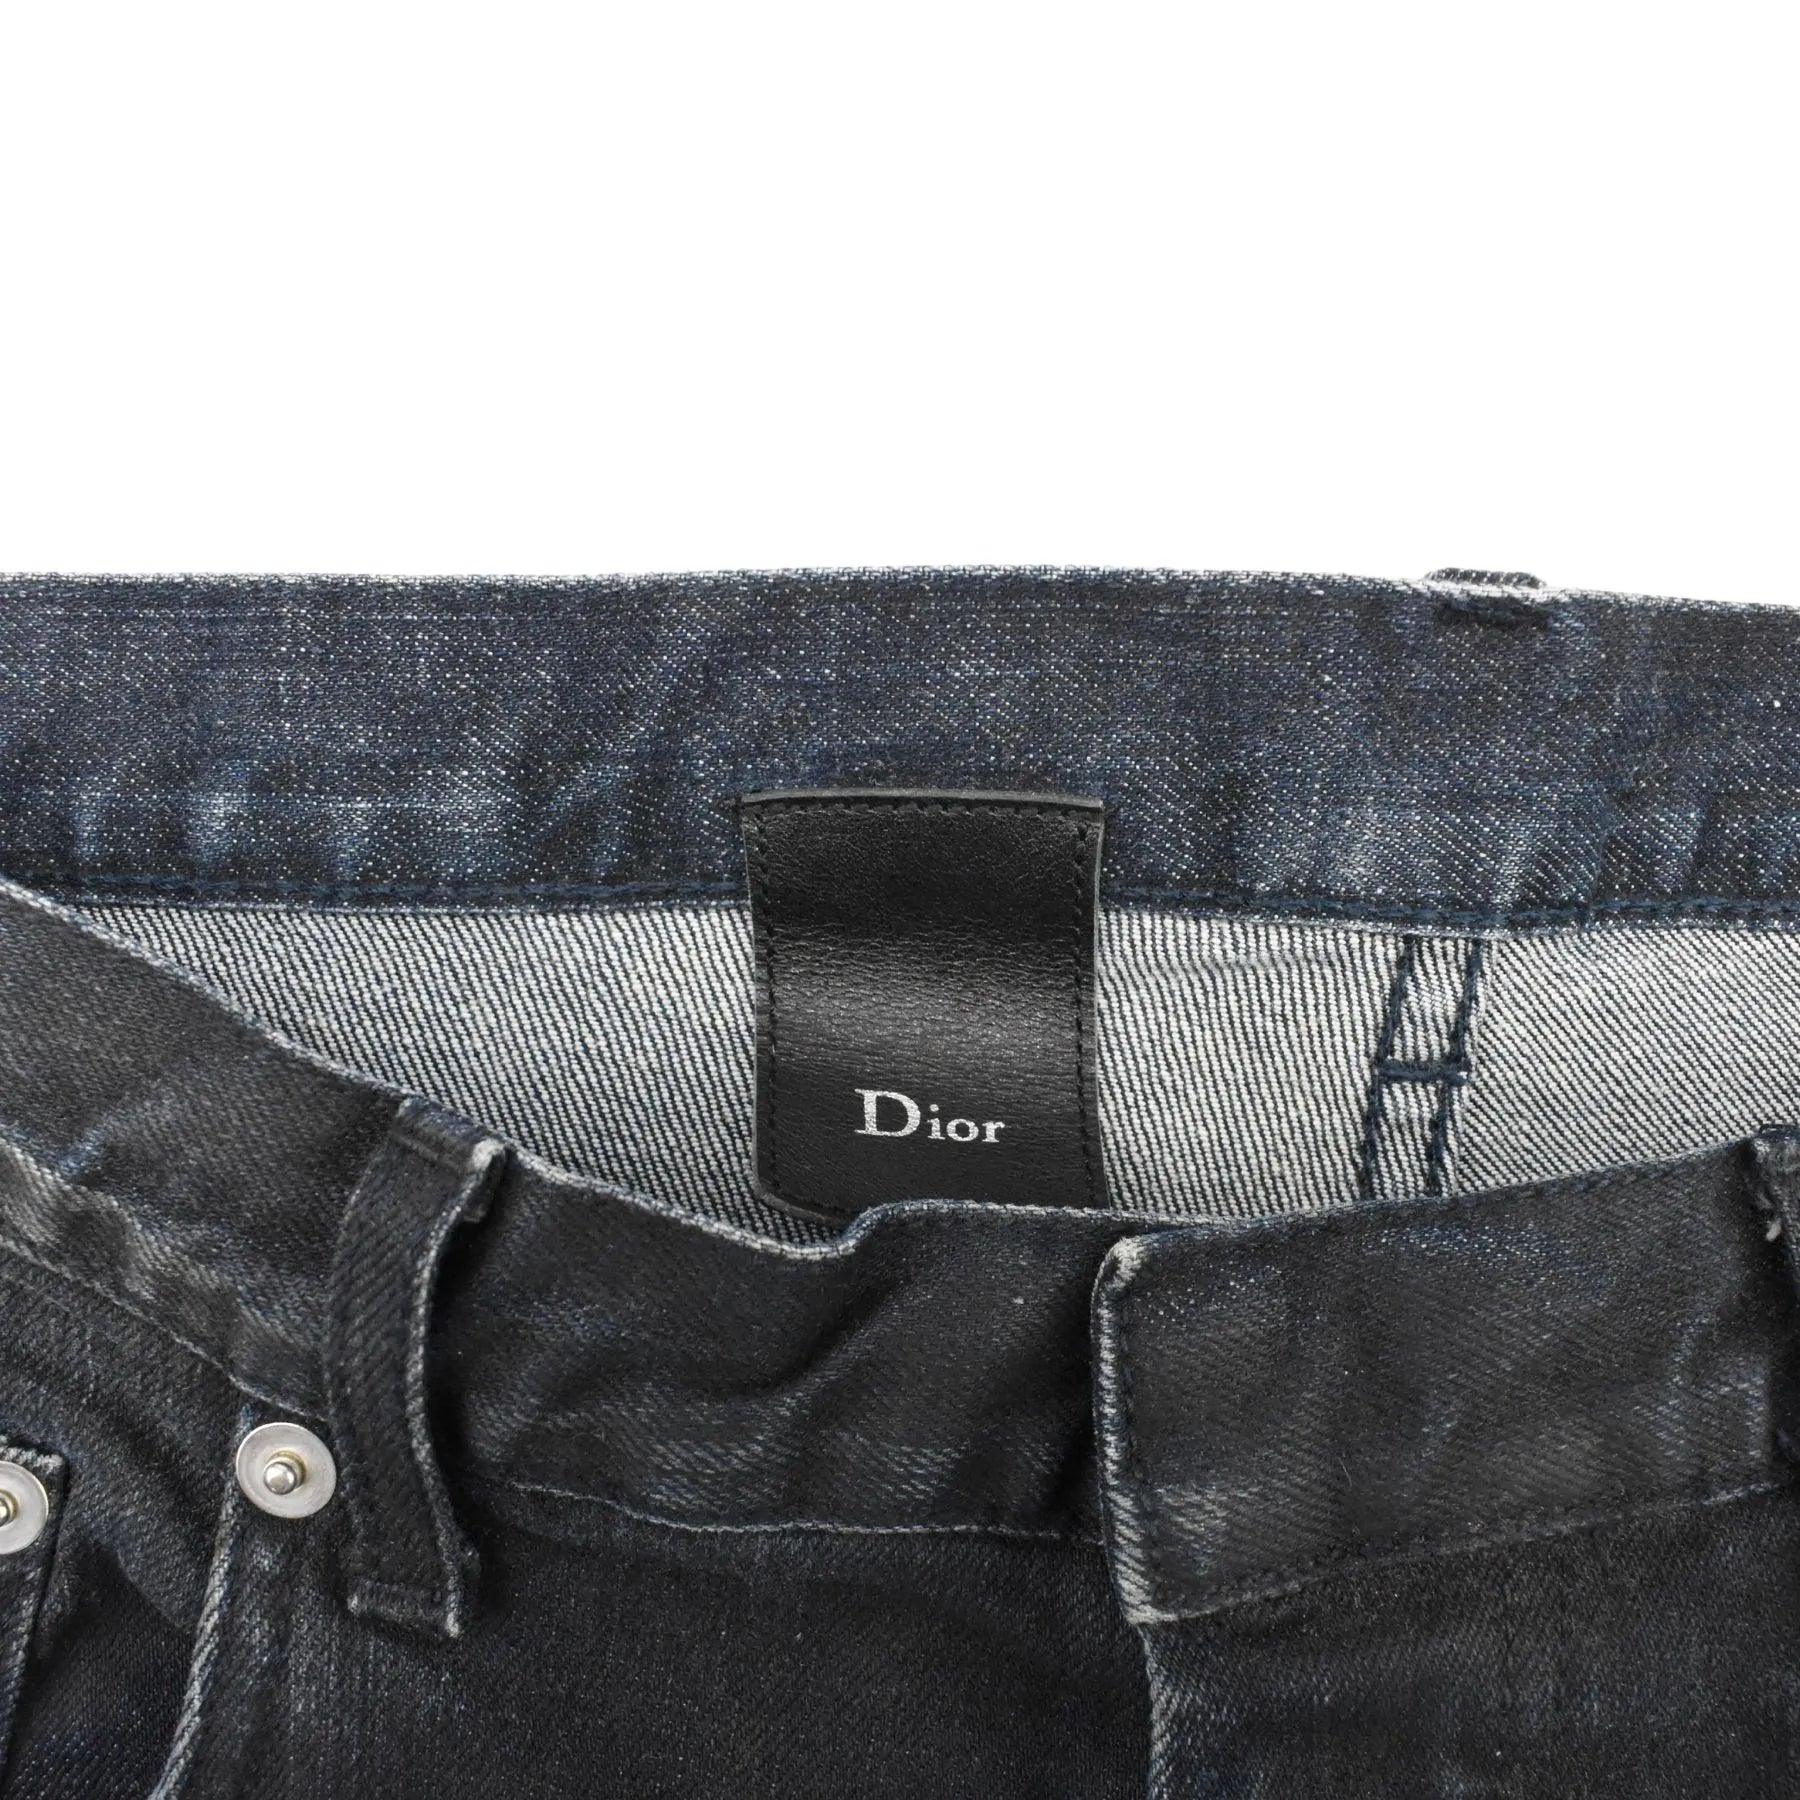 Christian Dior Jeans - Men's 32 - Fashionably Yours